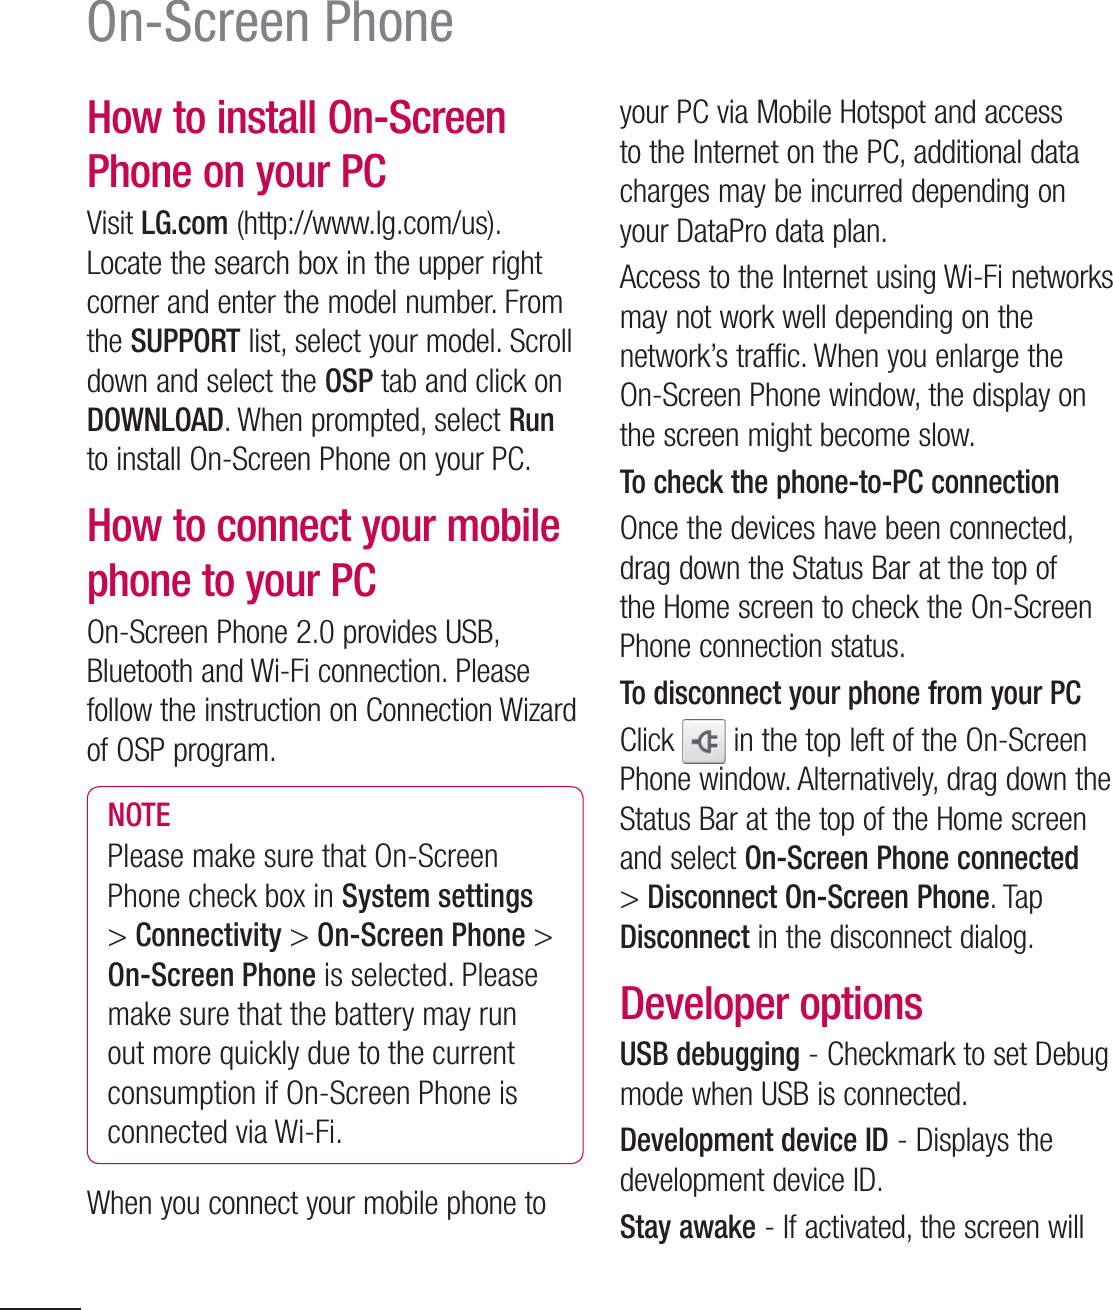 100On-Screen PhoneHow to install On-Screen Phone on your PCVisit LG.com (http://www.lg.com/us). Locate the search box in the upper right corner and enter the model number. From the SUPPORT list, select your model. Scroll down and select the OSP tab and click on DOWNLOAD. When prompted, select Run to install On-Screen Phone on your PC.How to connect your mobile phone to your PCOn-Screen Phone 2.0 provides USB, Bluetooth and Wi-Fi connection. Please follow the instruction on Connection Wizard of OSP program.NOTEPlease make sure that On-Screen Phone check box in System settings &gt; Connectivity &gt; On-Screen Phone &gt; On-Screen Phone is selected. Please make sure that the battery may run out more quickly due to the current consumption if On-Screen Phone is connected via Wi-Fi.When you connect your mobile phone to your PC via Mobile Hotspot and access to the Internet on the PC, additional data charges may be incurred depending on your DataPro data plan.Access to the Internet using Wi-Fi networks may not work well depending on the network’s traffic. When you enlarge the On-Screen Phone window, the display on the screen might become slow.To check the phone-to-PC connectionOnce the devices have been connected, drag down the Status Bar at the top of the Home screen to check the On-Screen Phone connection status.To disconnect your phone from your PCClick   in the top left of the On-Screen Phone window. Alternatively, drag down the Status Bar at the top of the Home screen and select On-Screen Phone connected &gt; Disconnect On-Screen Phone. Tap Disconnect in the disconnect dialog.Developer optionsUSB debugging - Checkmark to set Debug mode when USB is connected.Development device ID - Displays the development device ID.Stay awake - If activated, the screen will 